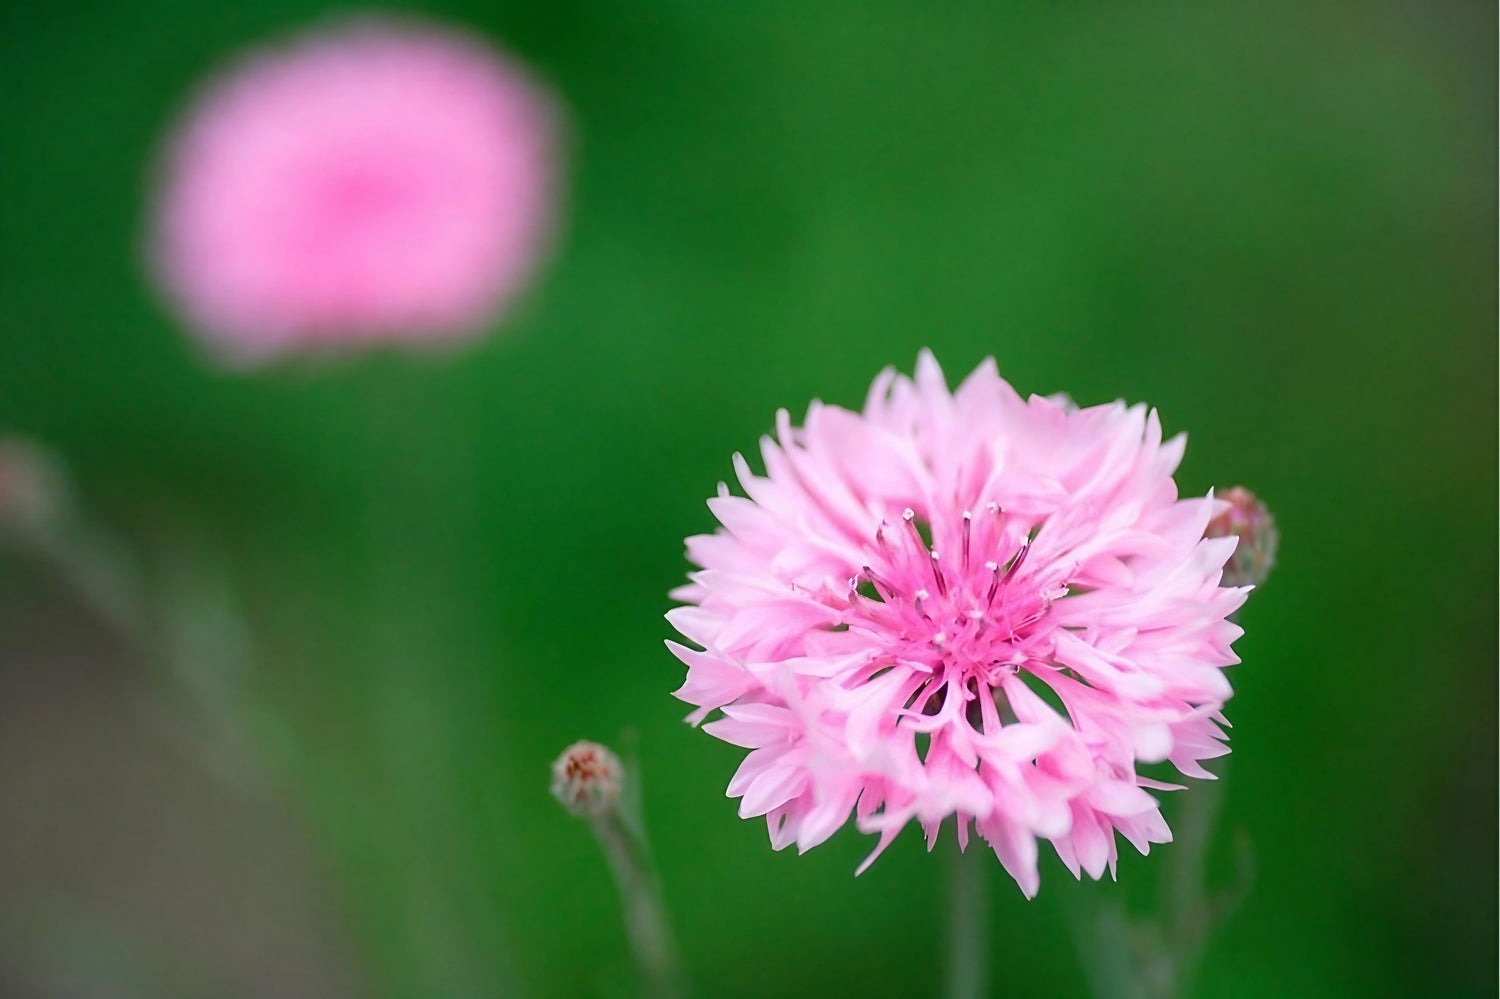 Close-up of a Cornflower Pink Ball flower with green foliage